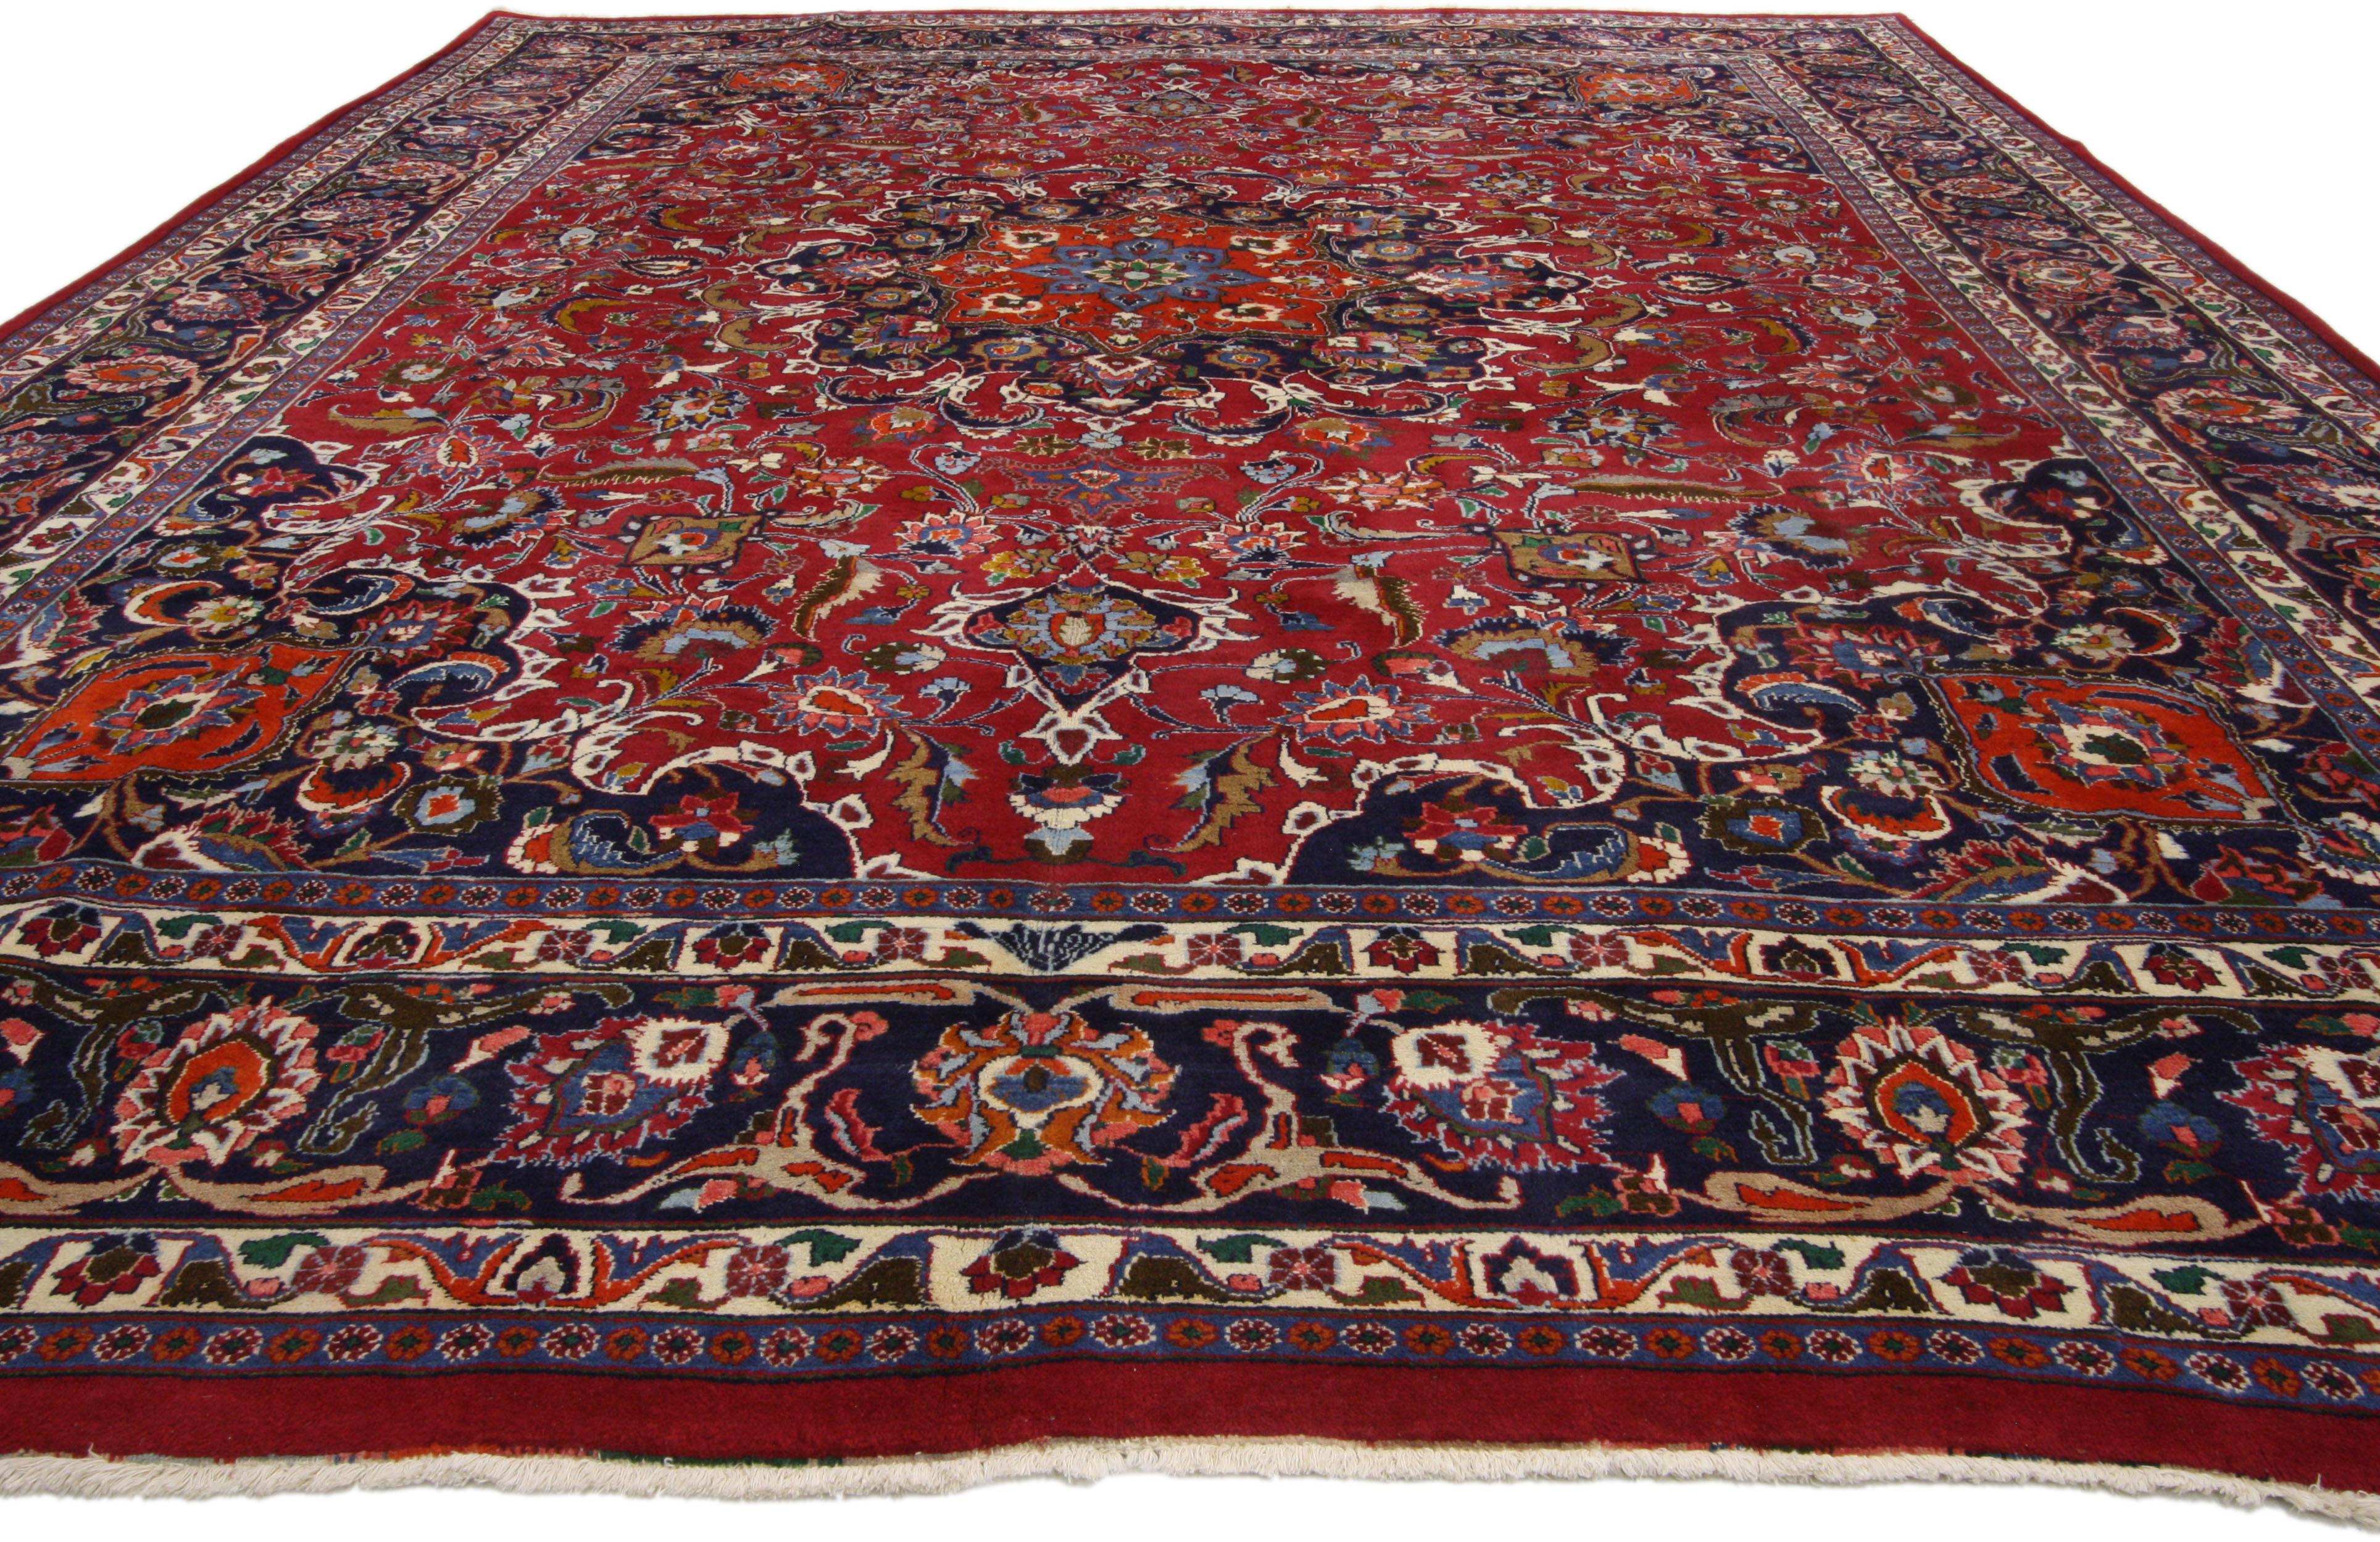 75916, vintage Persian Mashhad Area rug with traditional style. This hand-knotted wool vintage Persian Mashhad rug features a 16-point Mashhad medallion in a field of palmettes, feathers, serrated leaves and blooming flowers. The central medallion